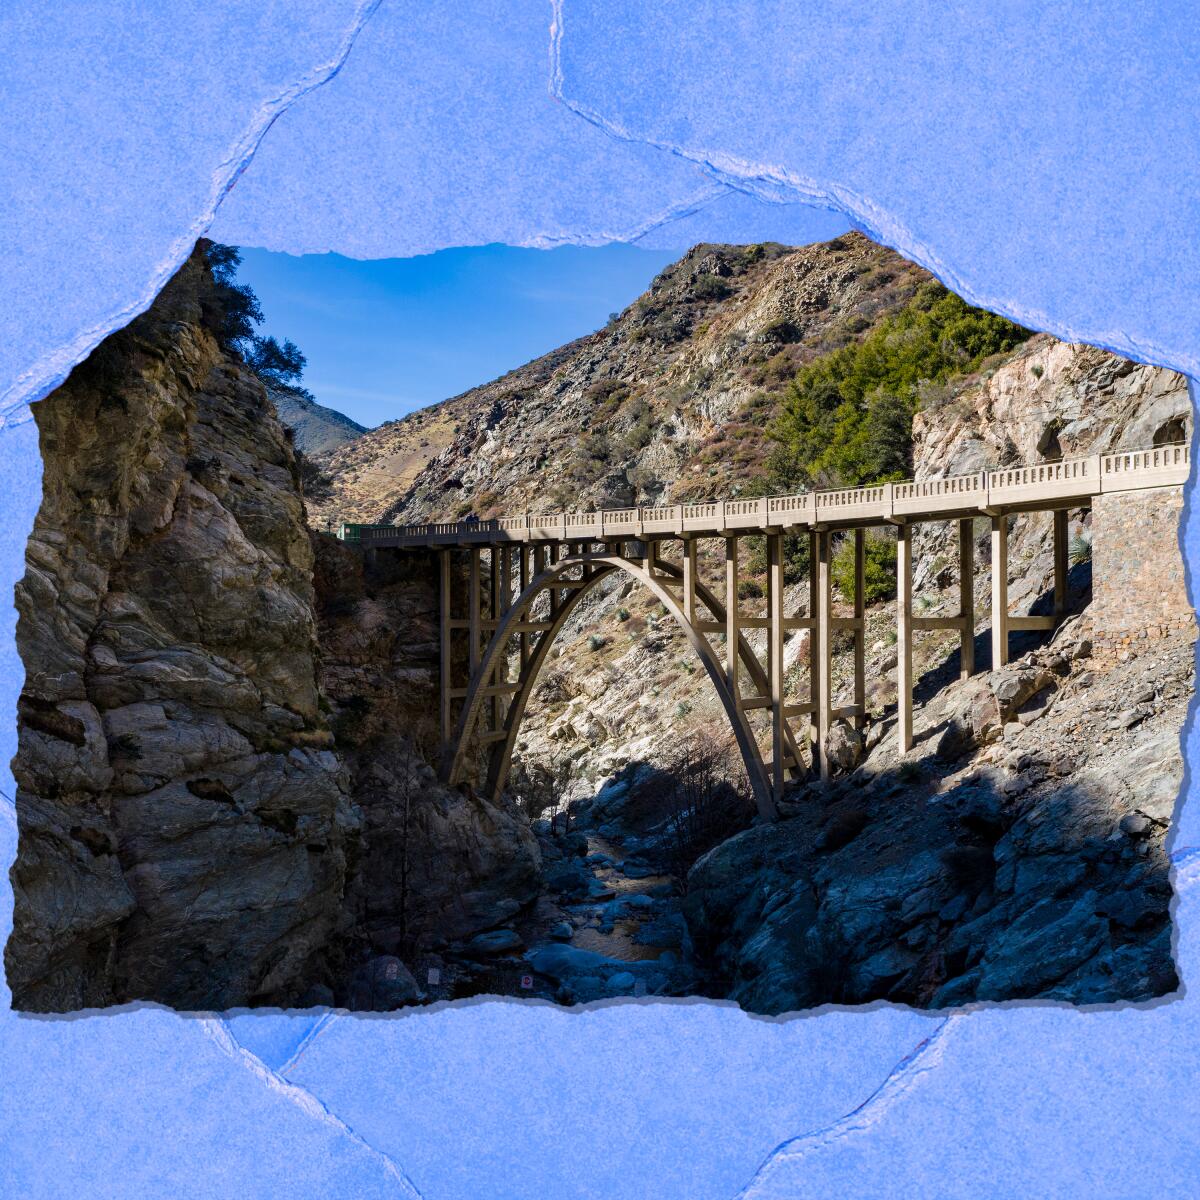 An arch bridge in the middle of the San Gabriel Mountains.